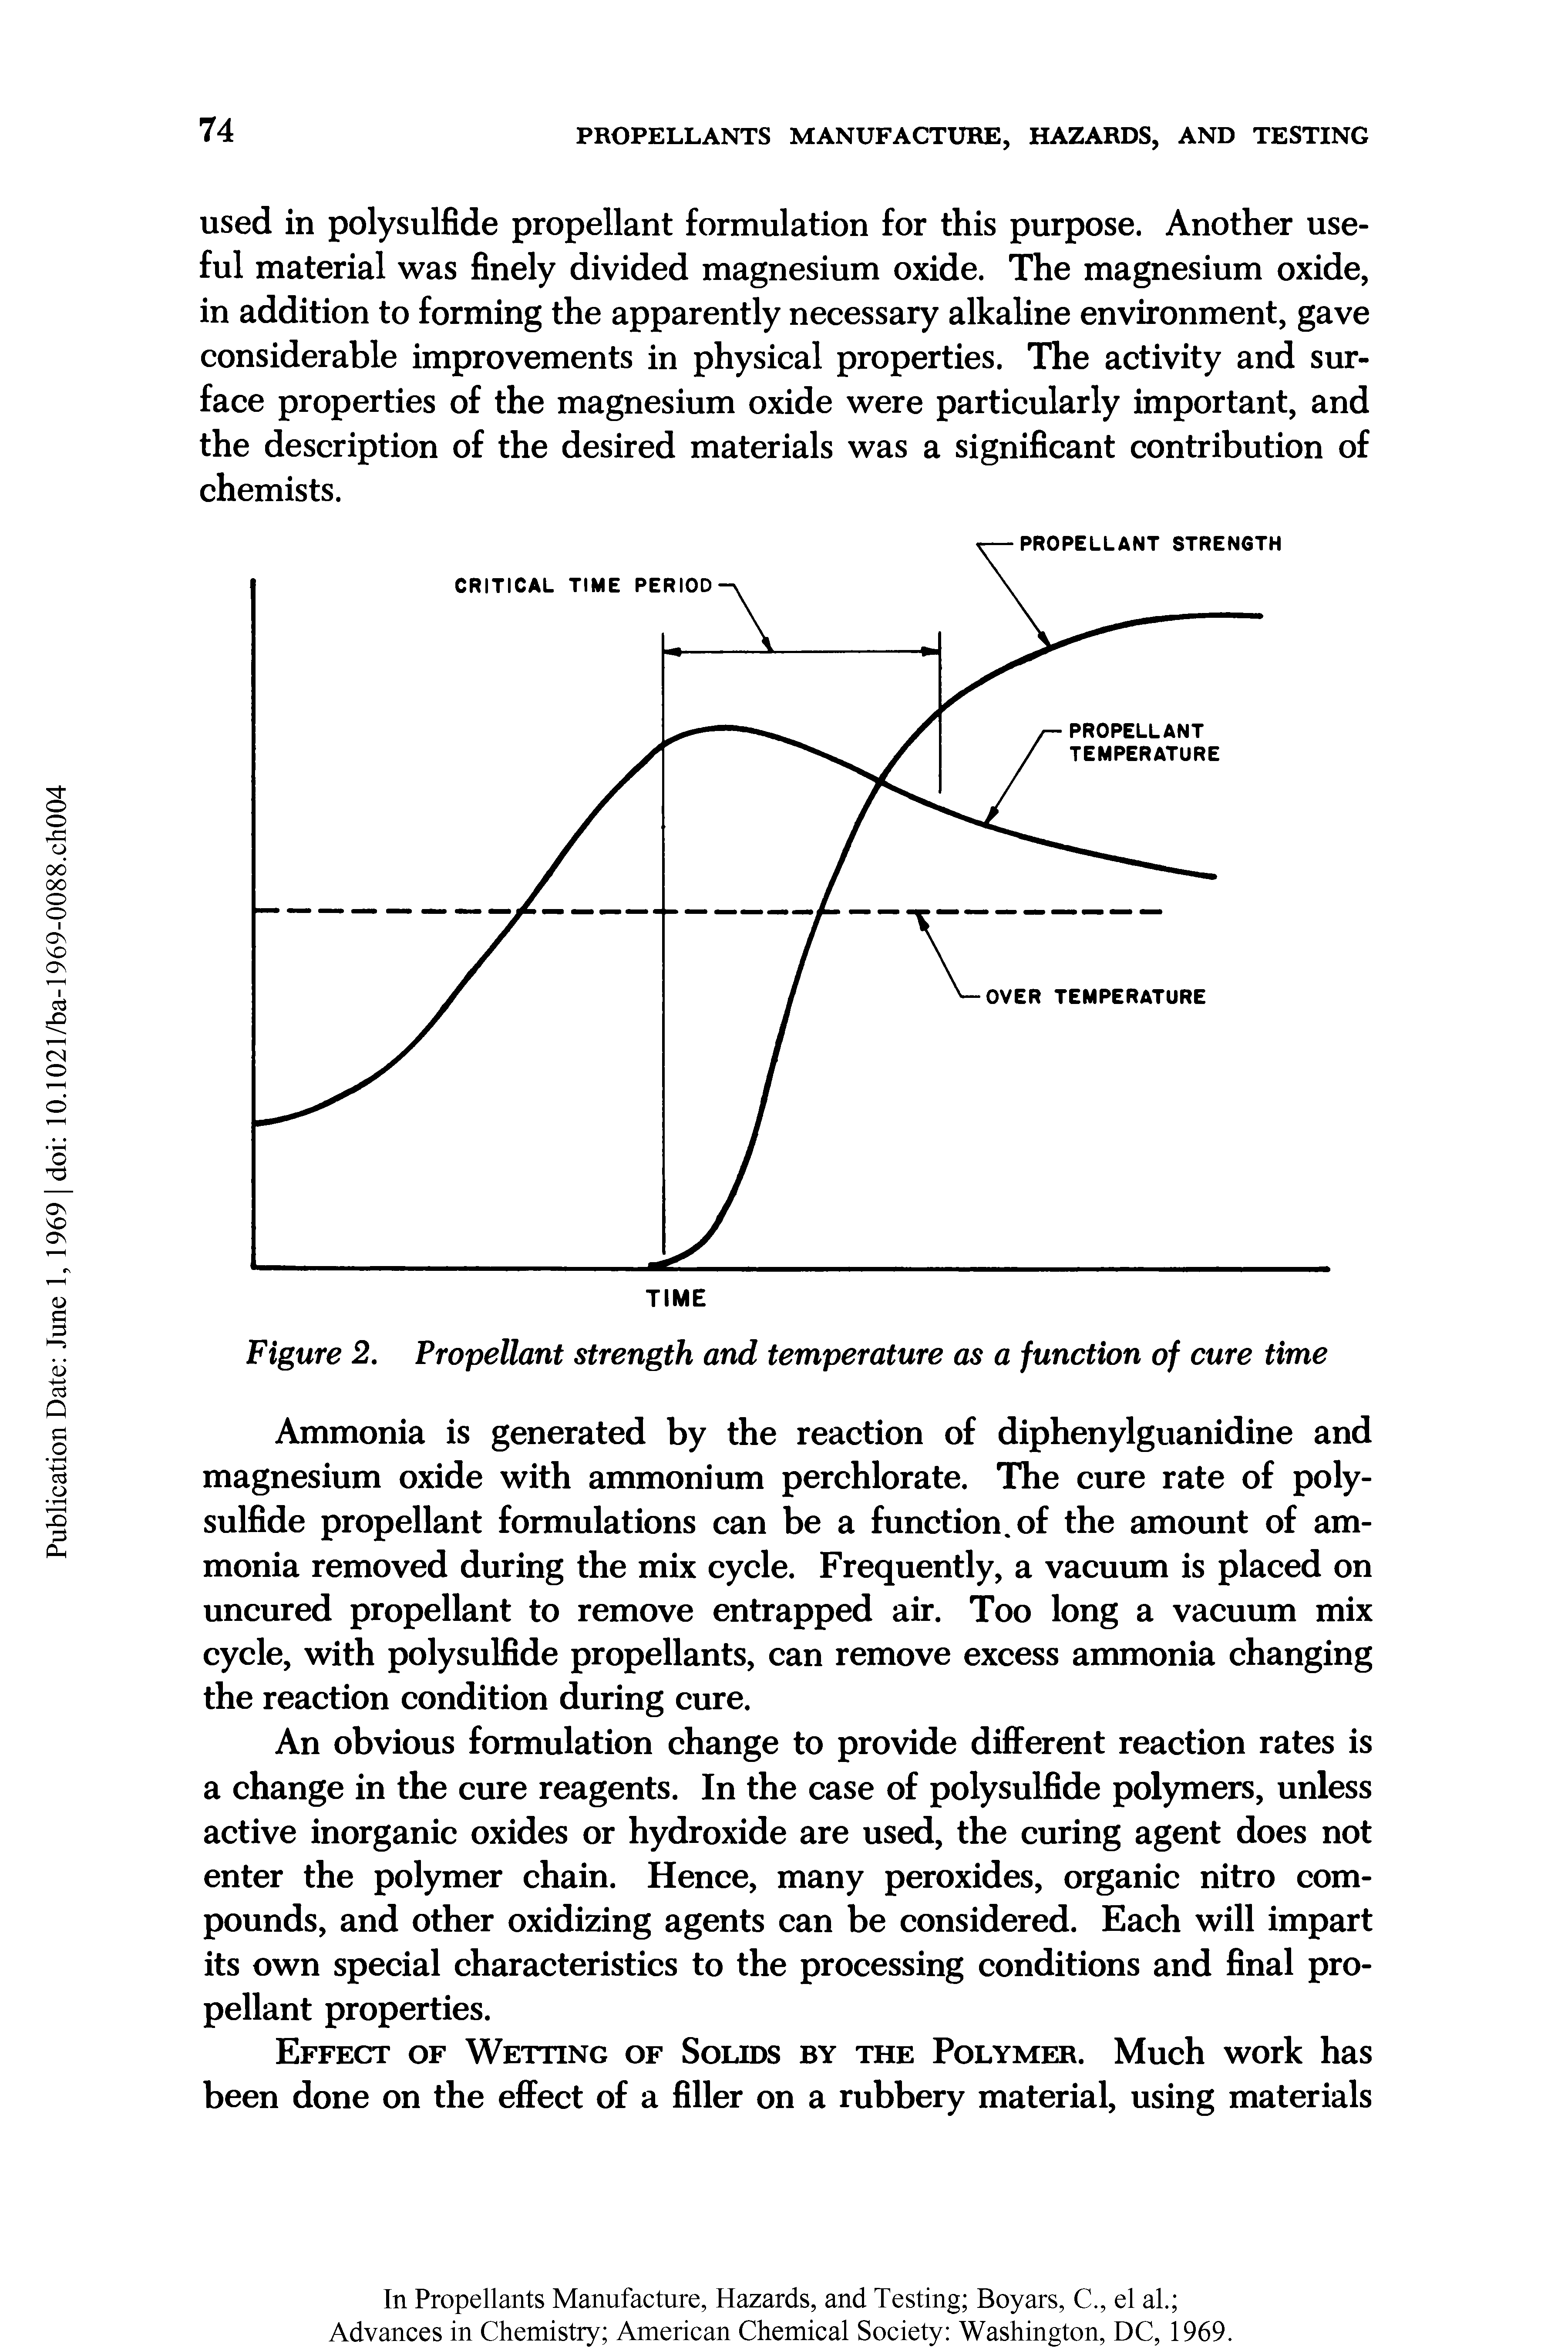 Figure 2. Propellant strength and temperature as a function of cure time...